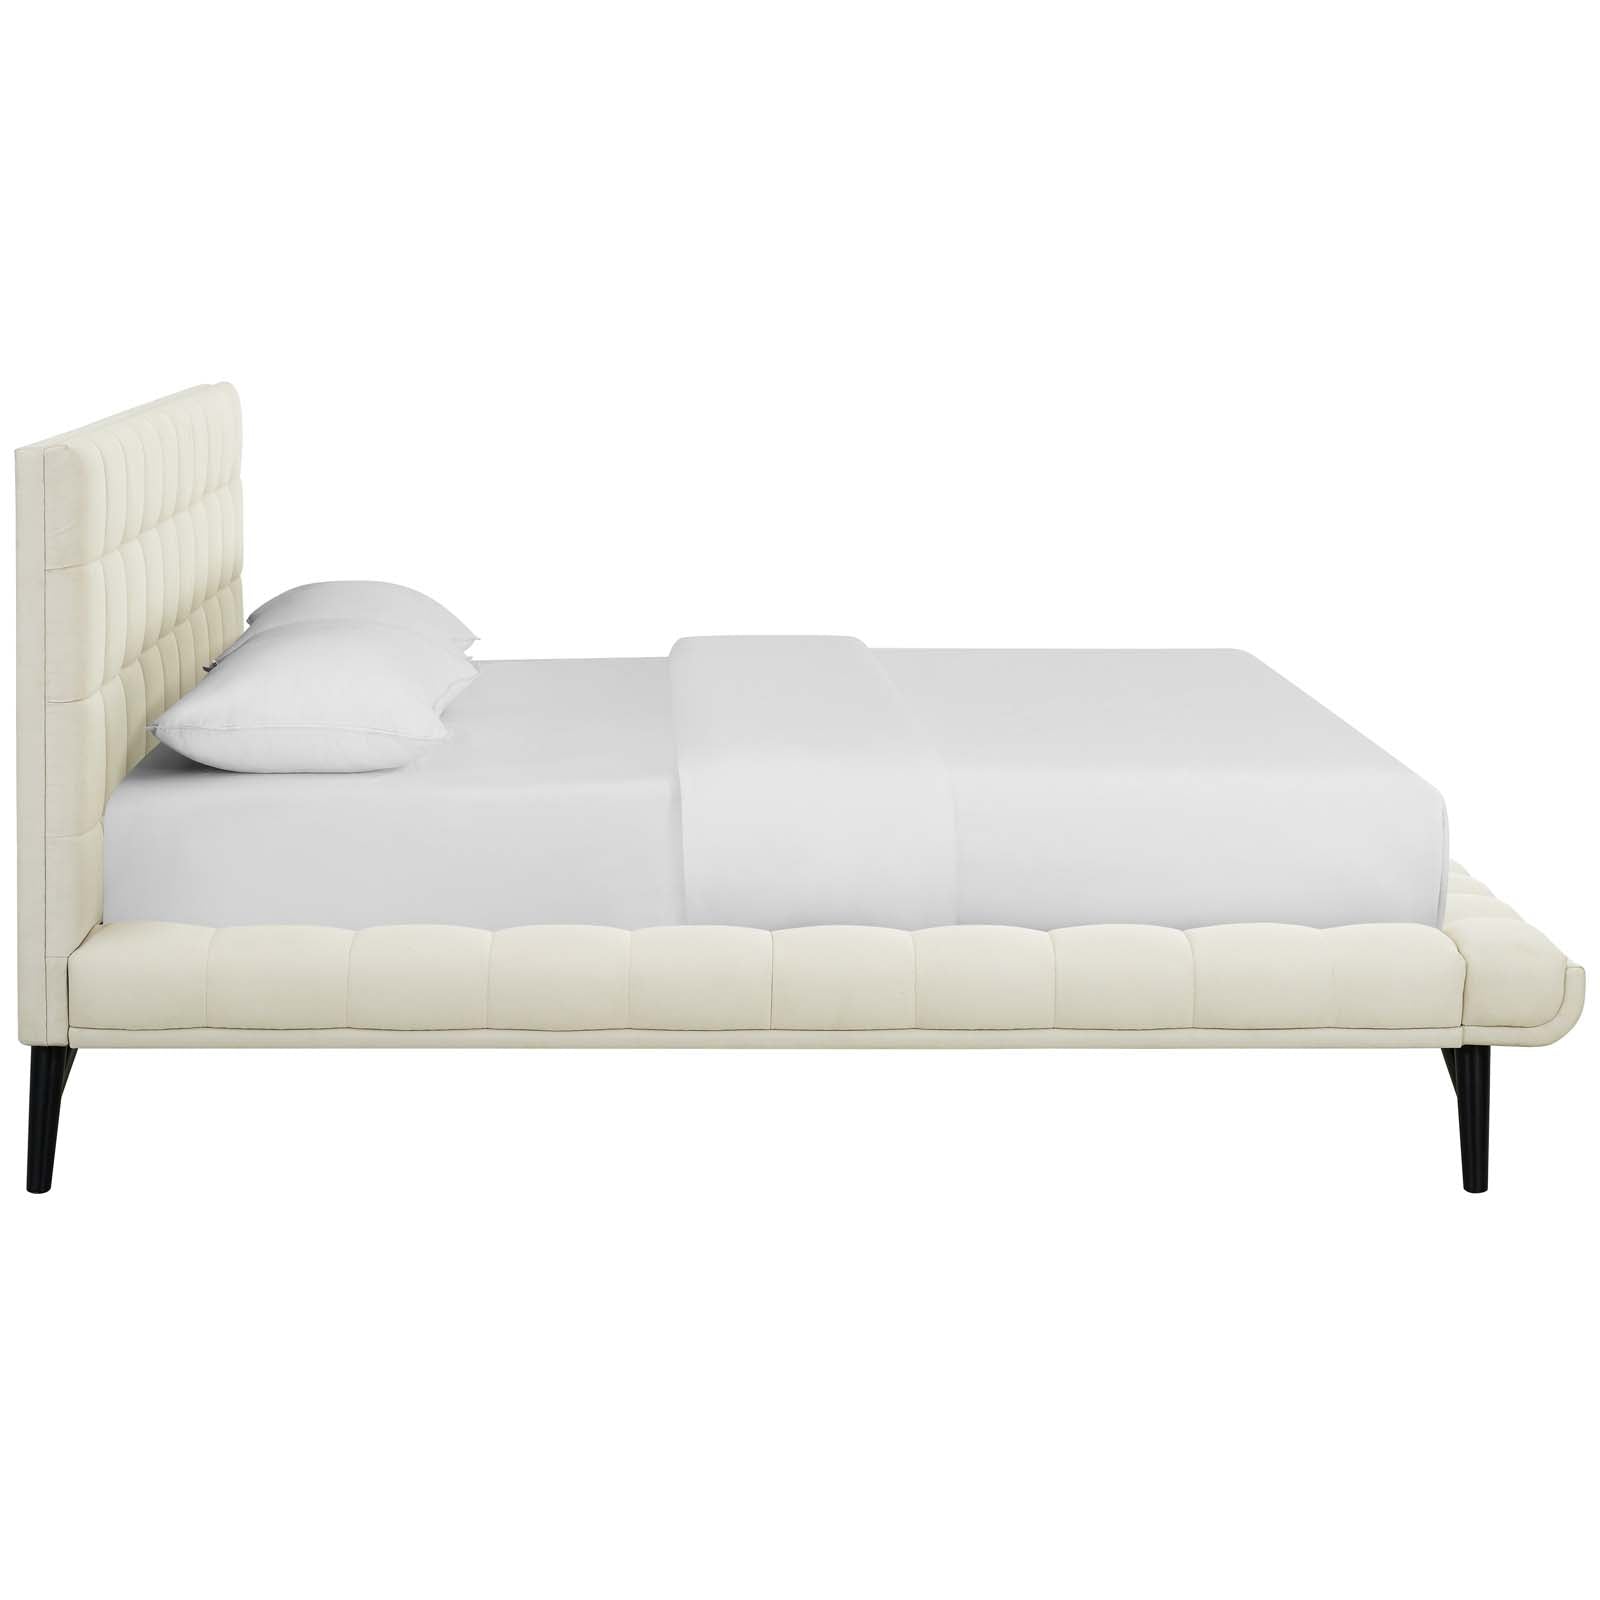 Modway Beds - Julia Biscuit Tufted Queen Bed Ivory